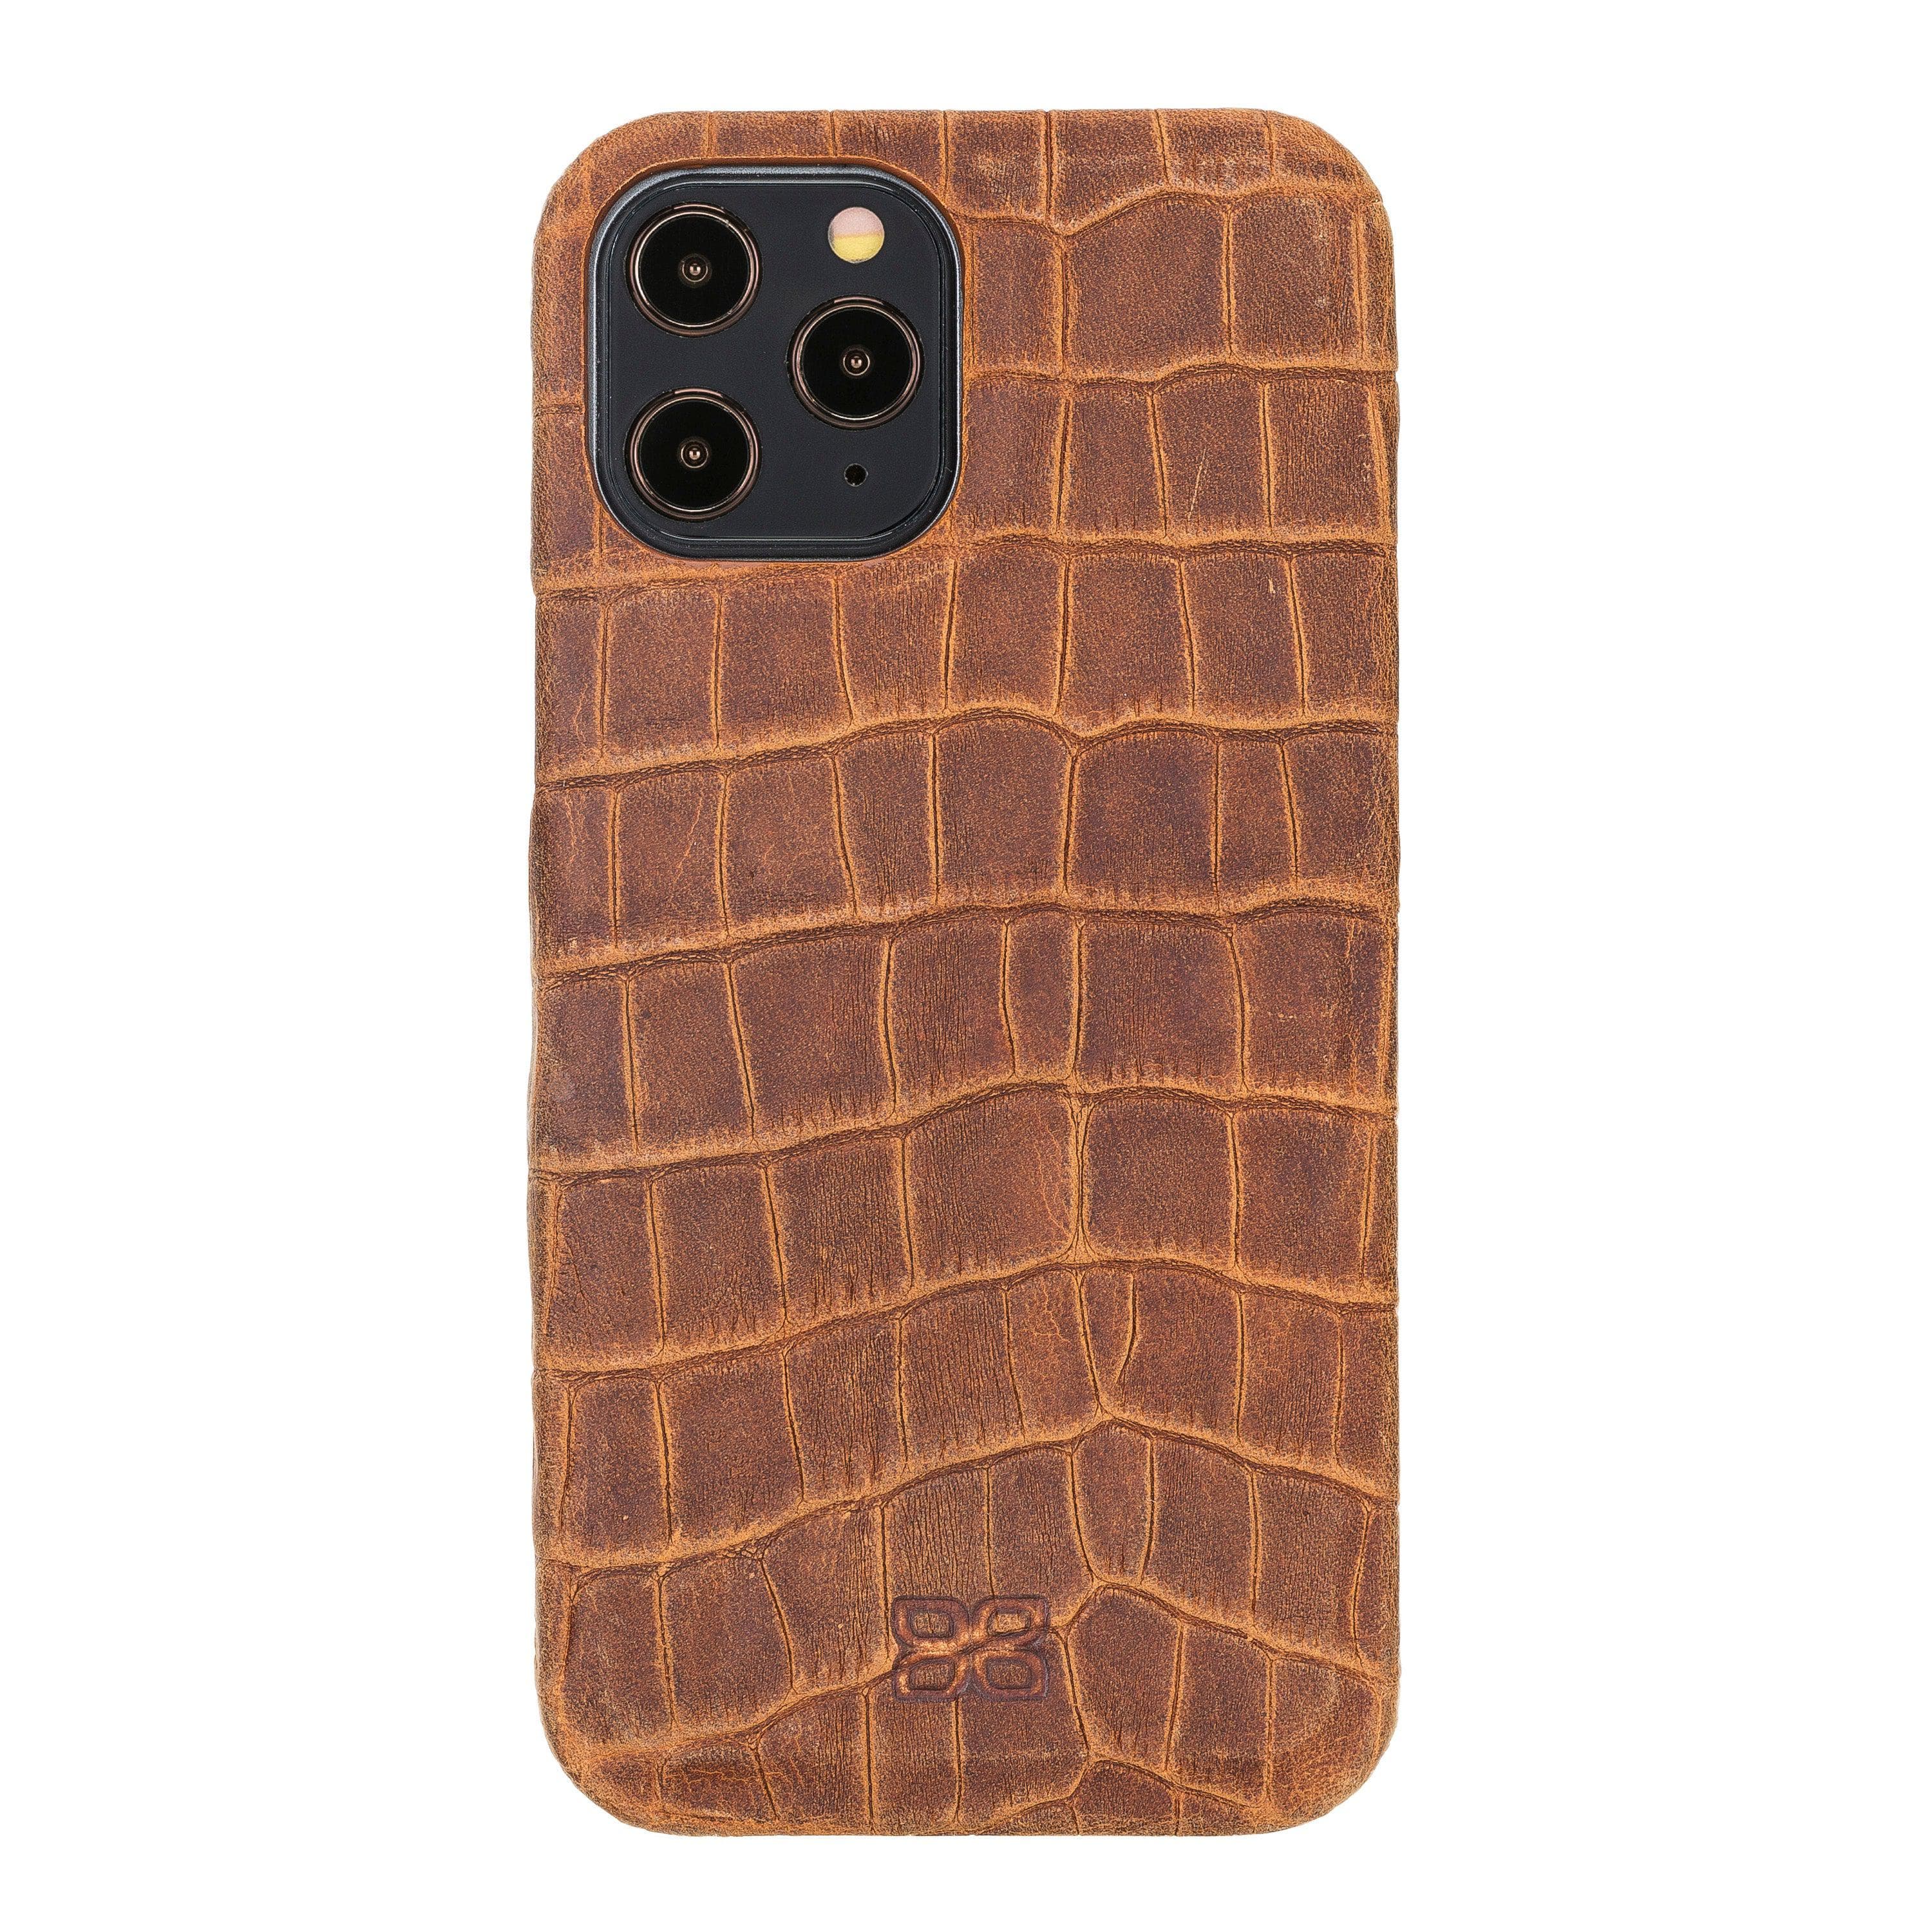 Fully Leather Back Cover for Apple iPhone 12 Series iPhone 12 Pro Max / Dragon Tan Bouletta LTD